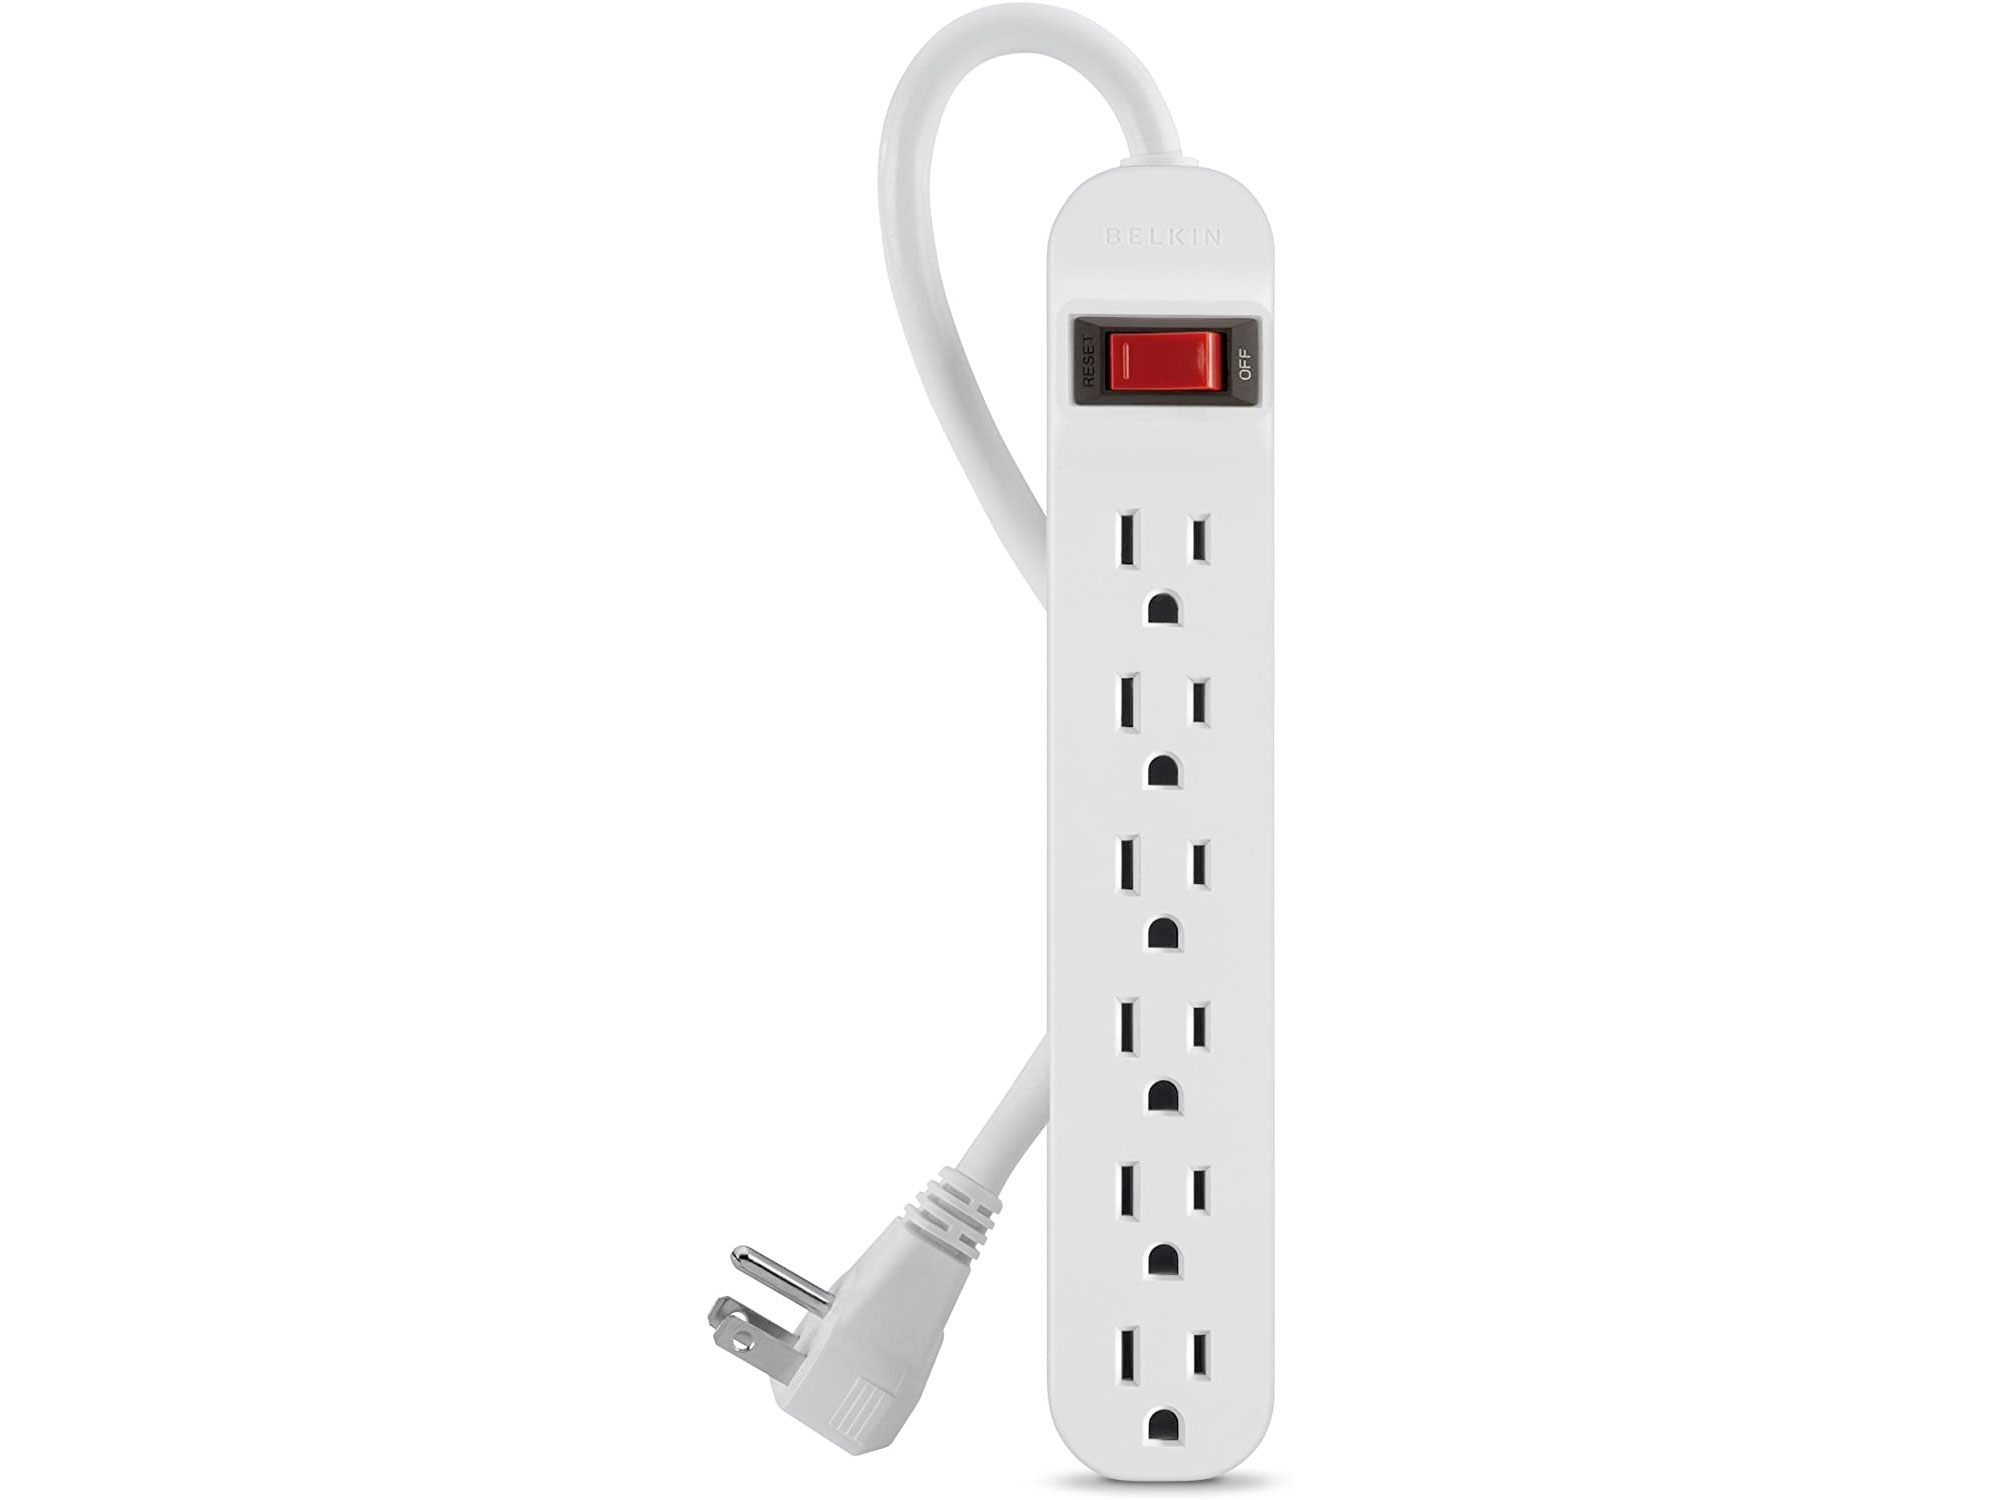 Amazon：Belkin 6-Outlet Surge Protector精选优惠